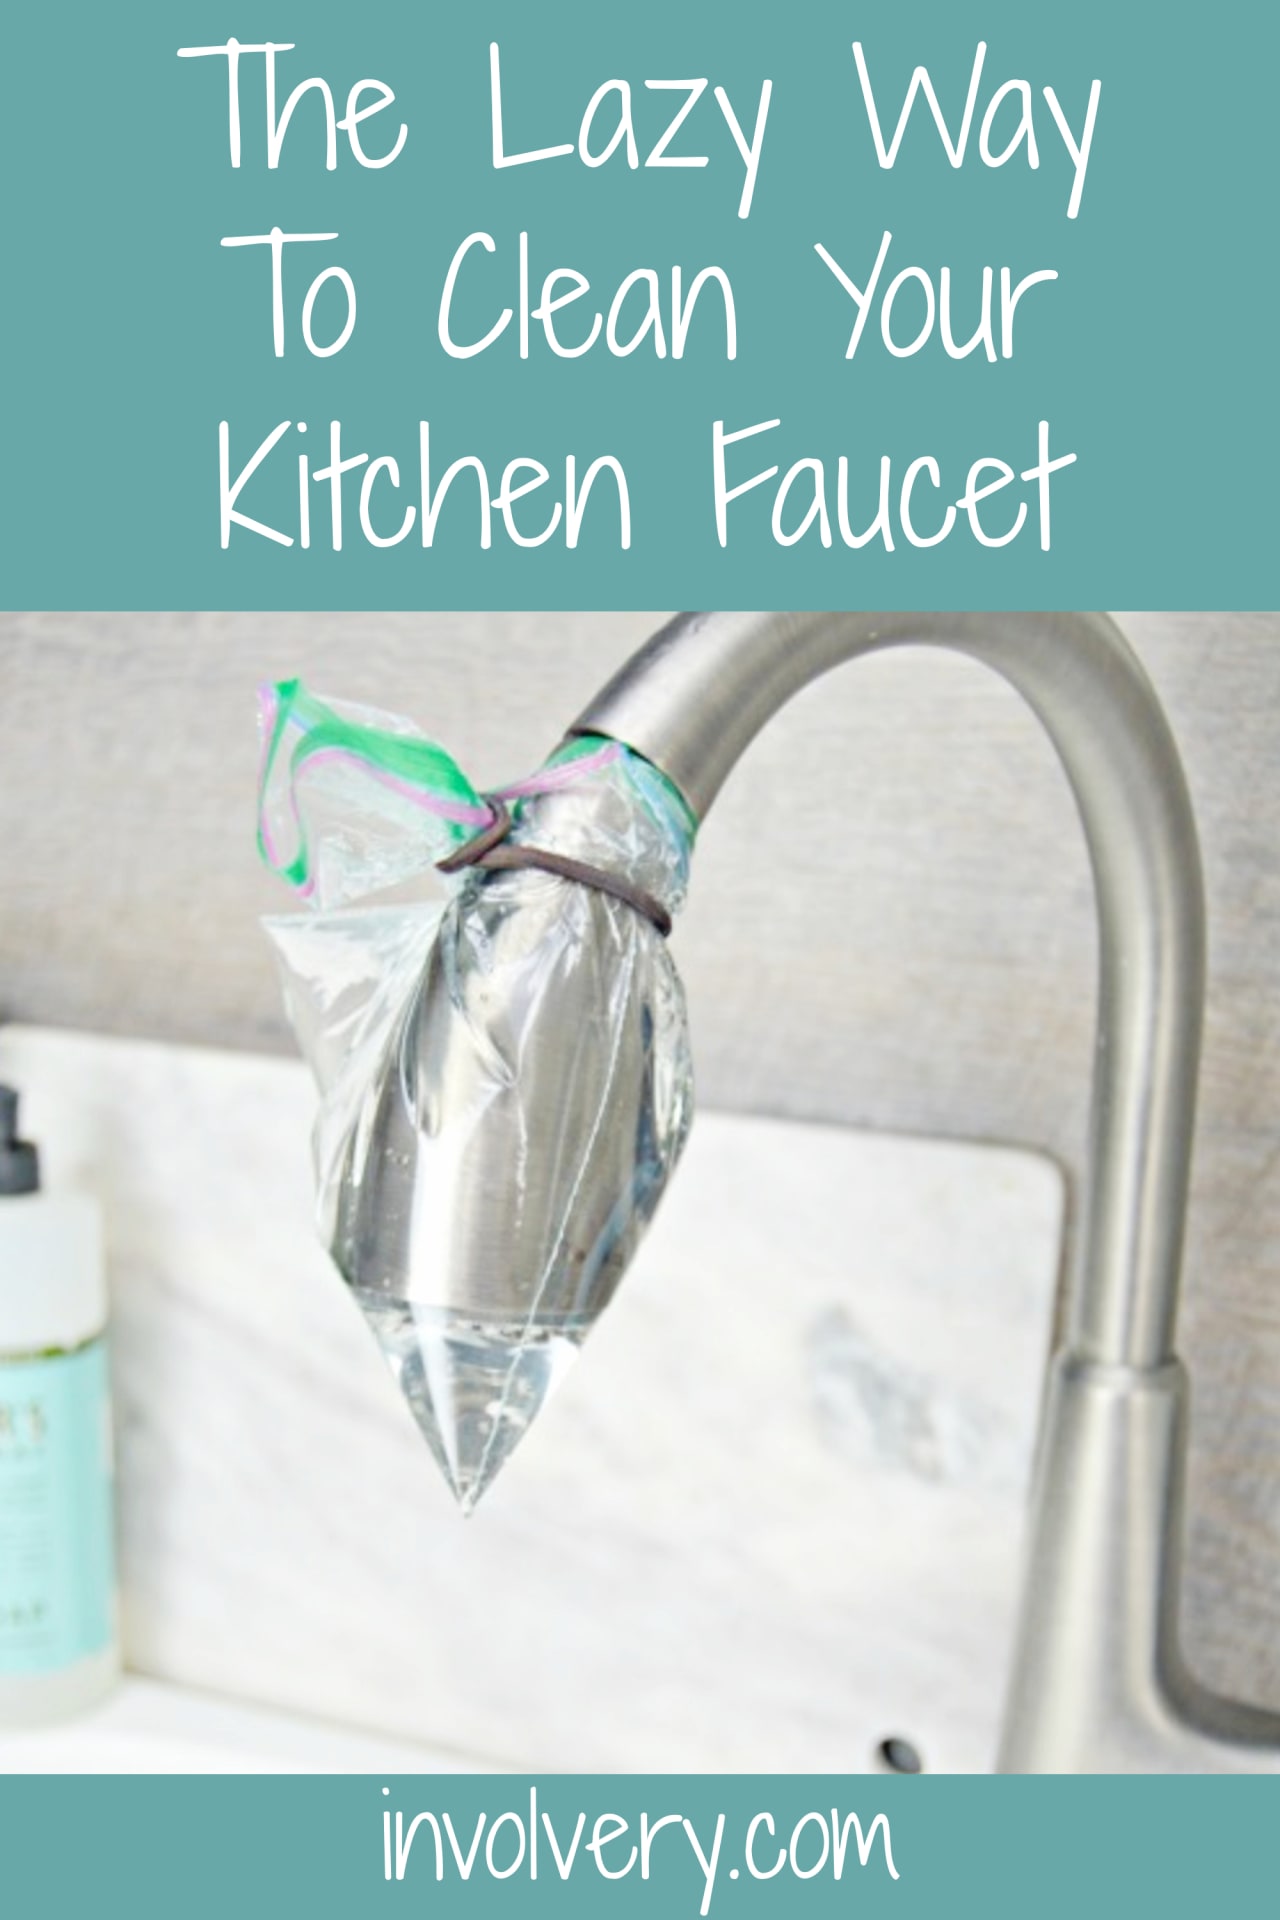 kitchen cleaning hacks - Lazy CLeaning Hacks!  This kitchen cleaning hack is a borderline genius life hack for cleaning your kitchen faucet the simple and lazy way!